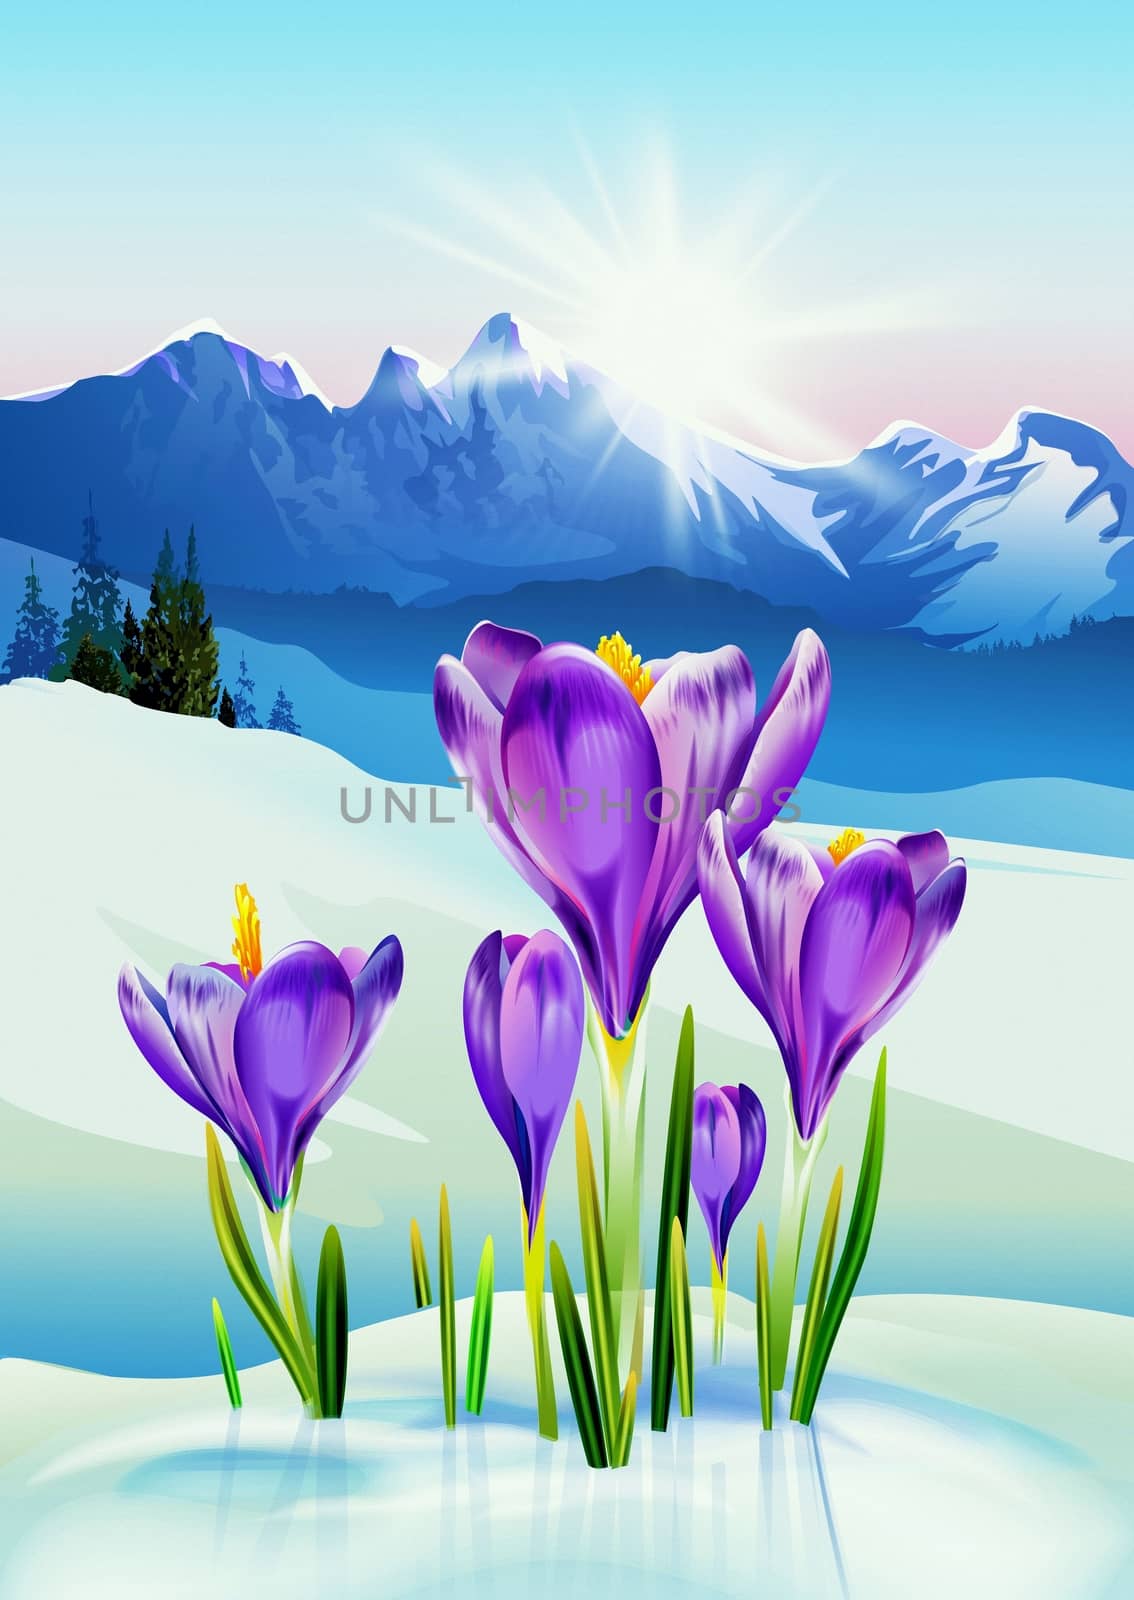 Spring in the Mountains Illustration. Crocus Flowers and the Winter Mountain Landscape. Signs of Coming Spring